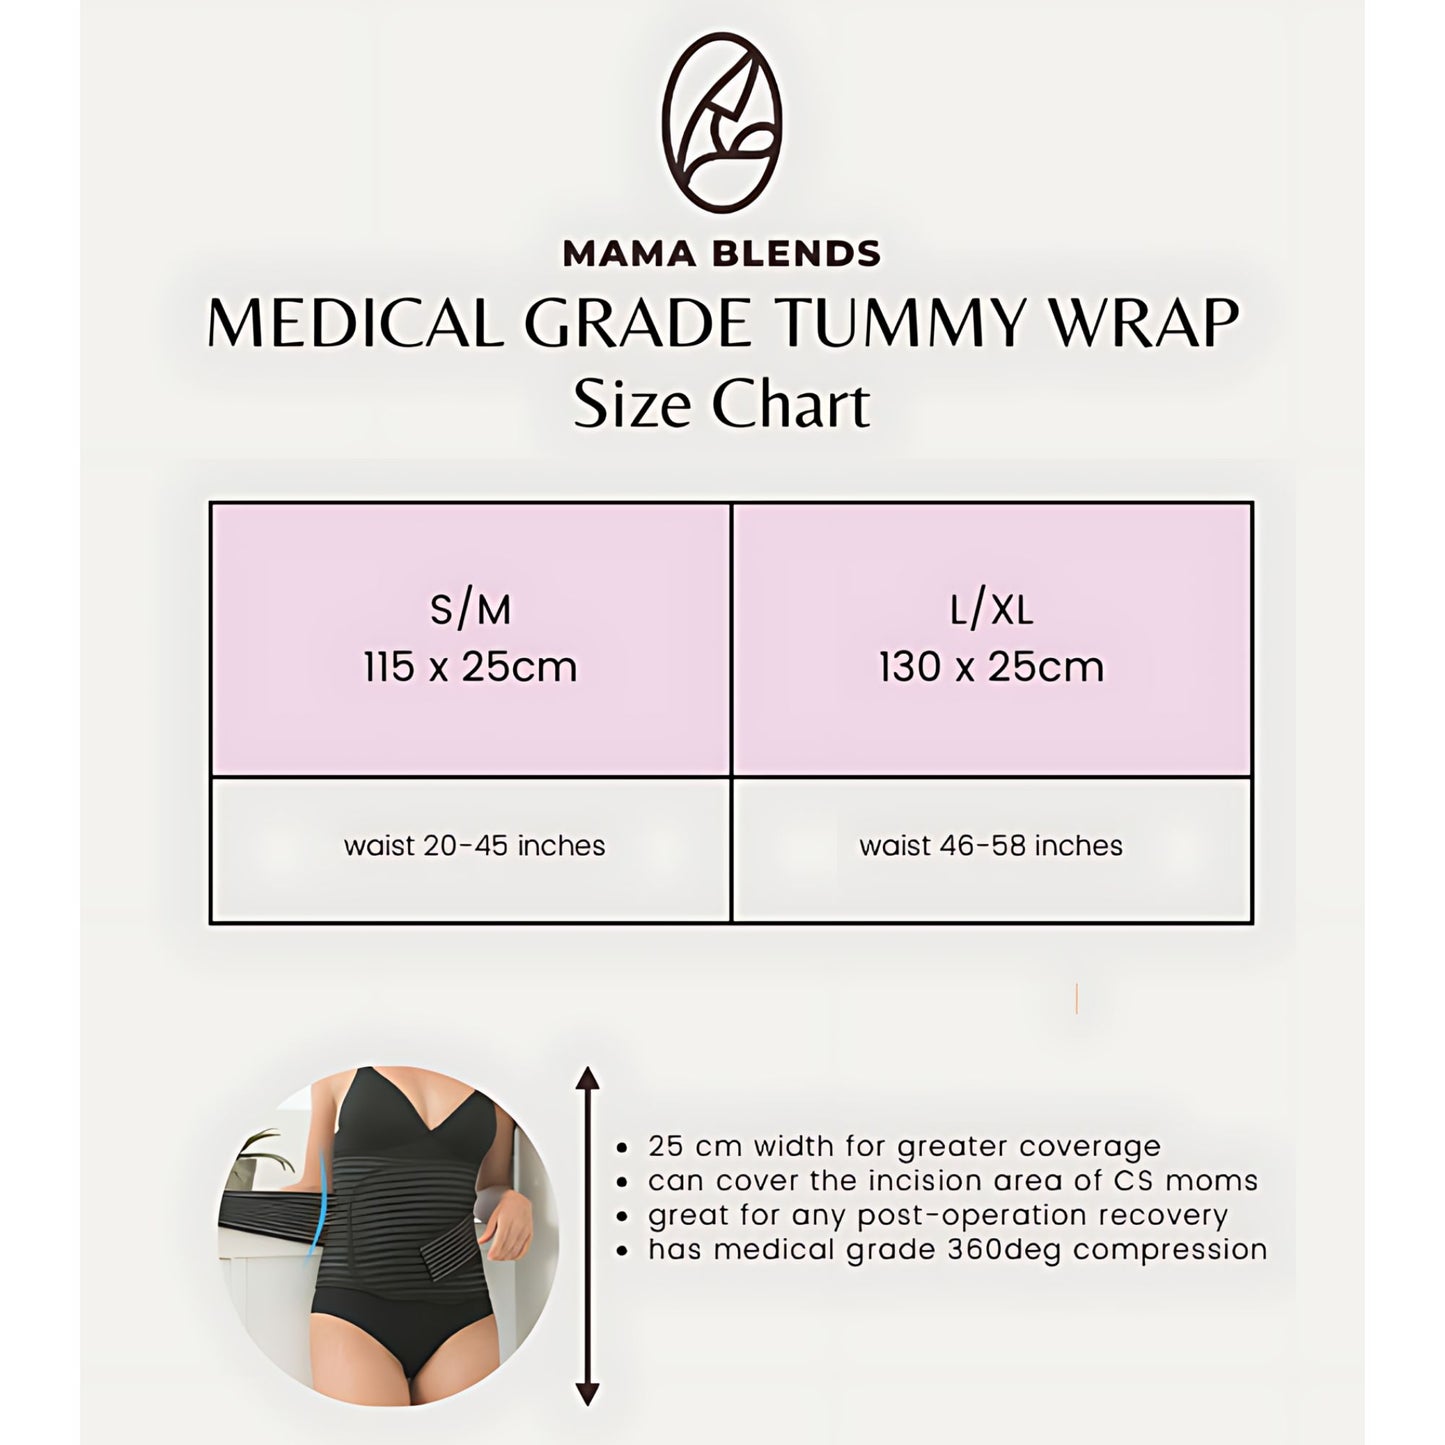 Lunabebe by Mama Blends Medical Grade Tummy Wrap Bamboo Charcoal Support Binder I Suitable for any post-operation recovery, Has medical grade 360deg compression, Can cover the incision area of CS moms